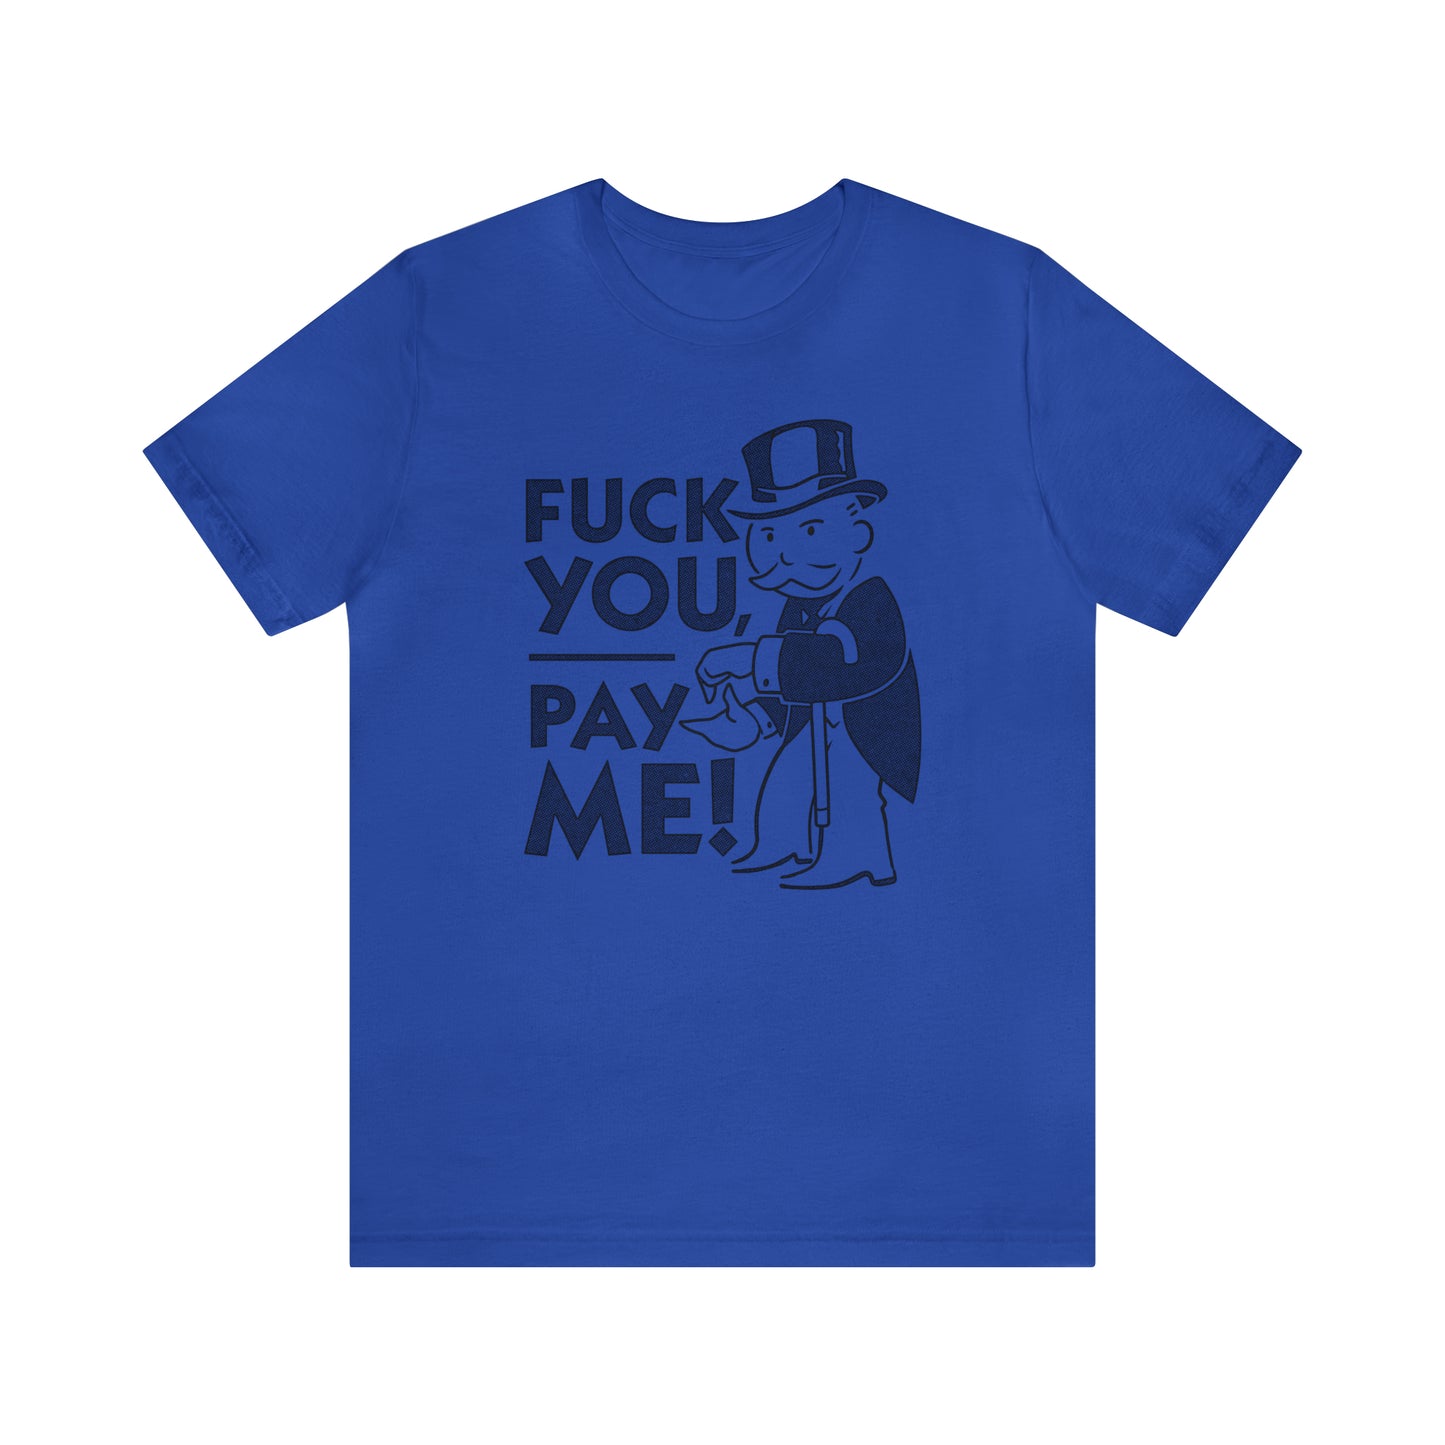 Eff You Pay Me Rent t-shirt